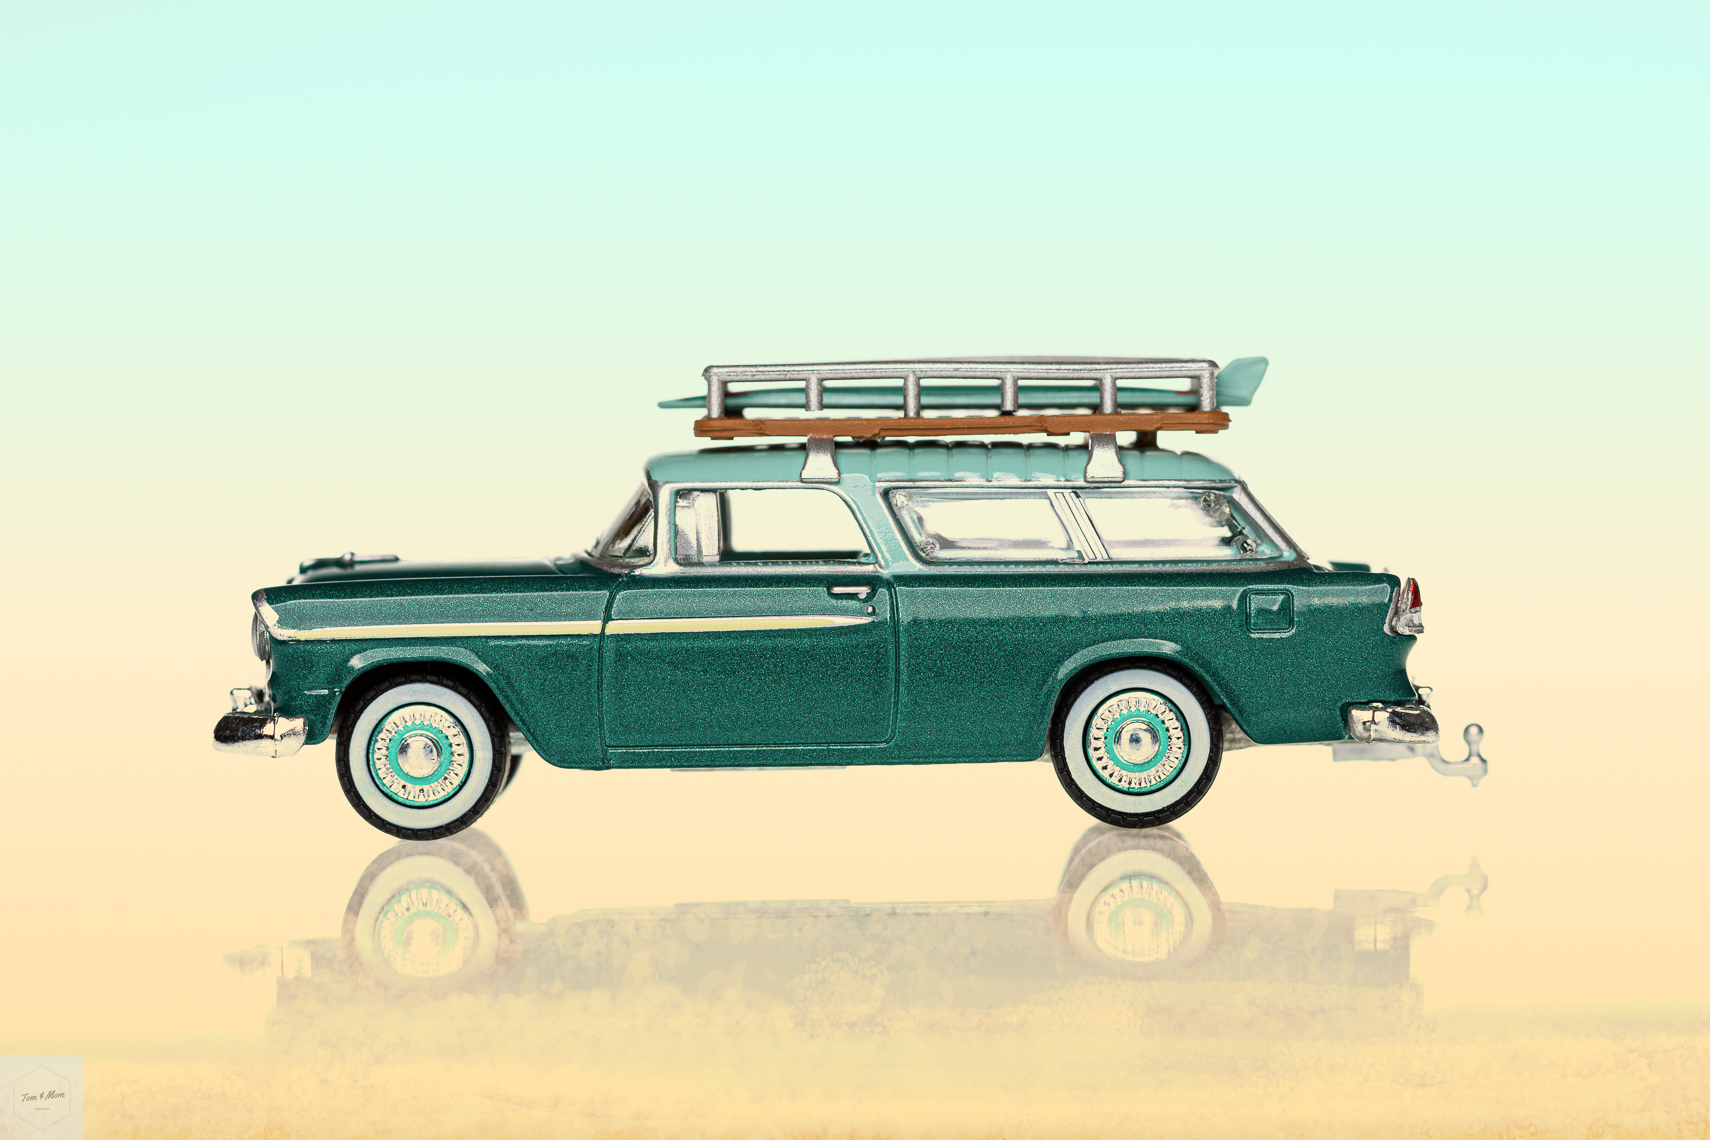 1955 Chevrolet Nomad with Surfboards